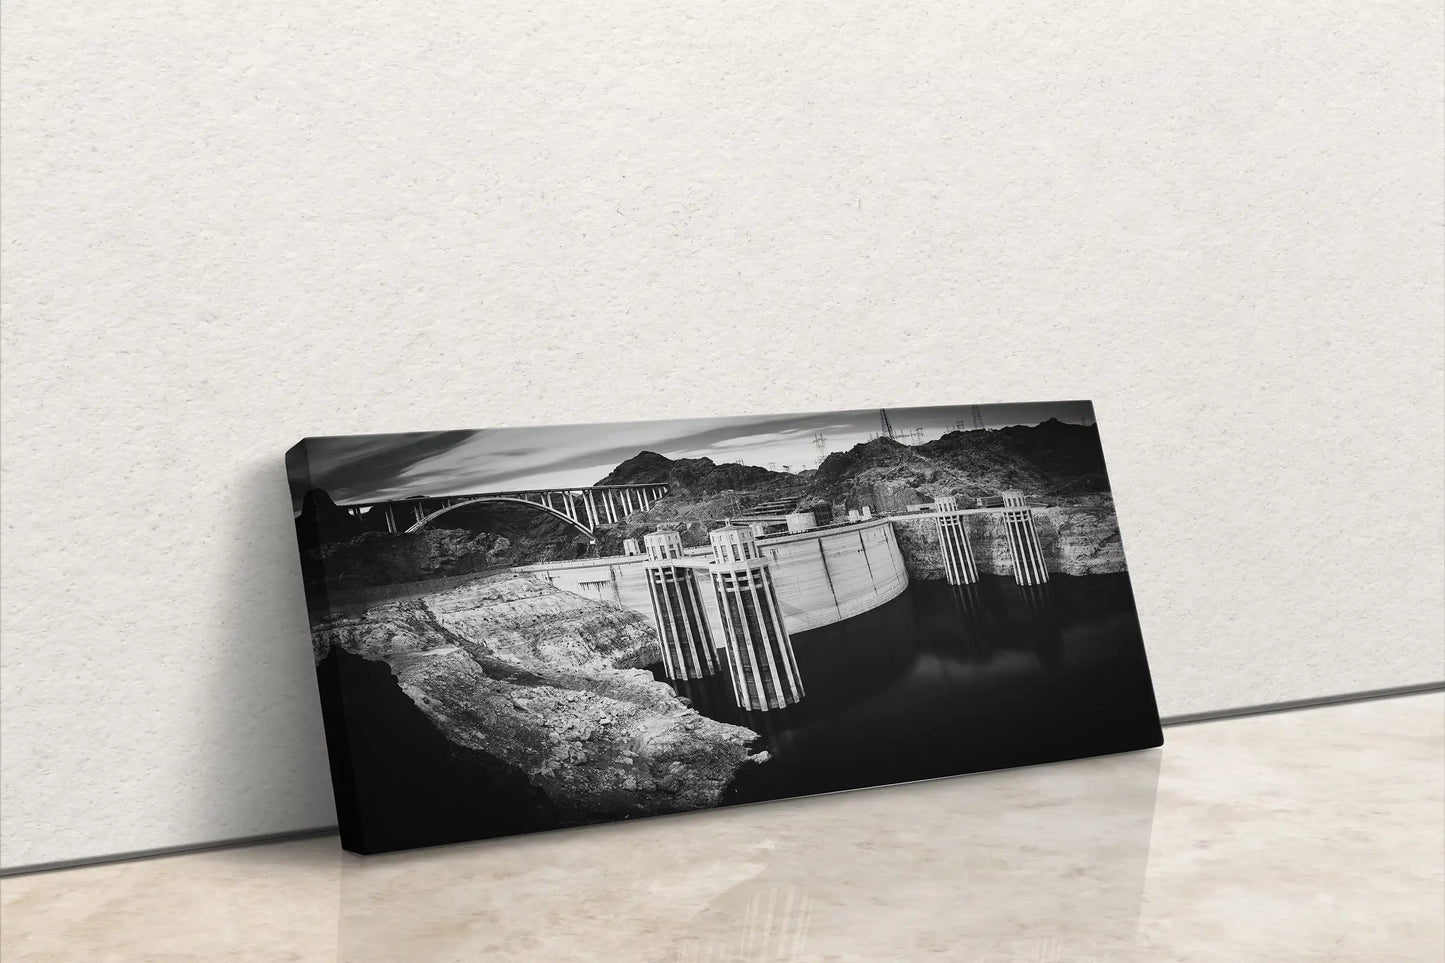 A canvas wall art piece leaning against a wall, featuring a black and white photograph of the Hoover Dam, ready to add a dramatic touch to any room.